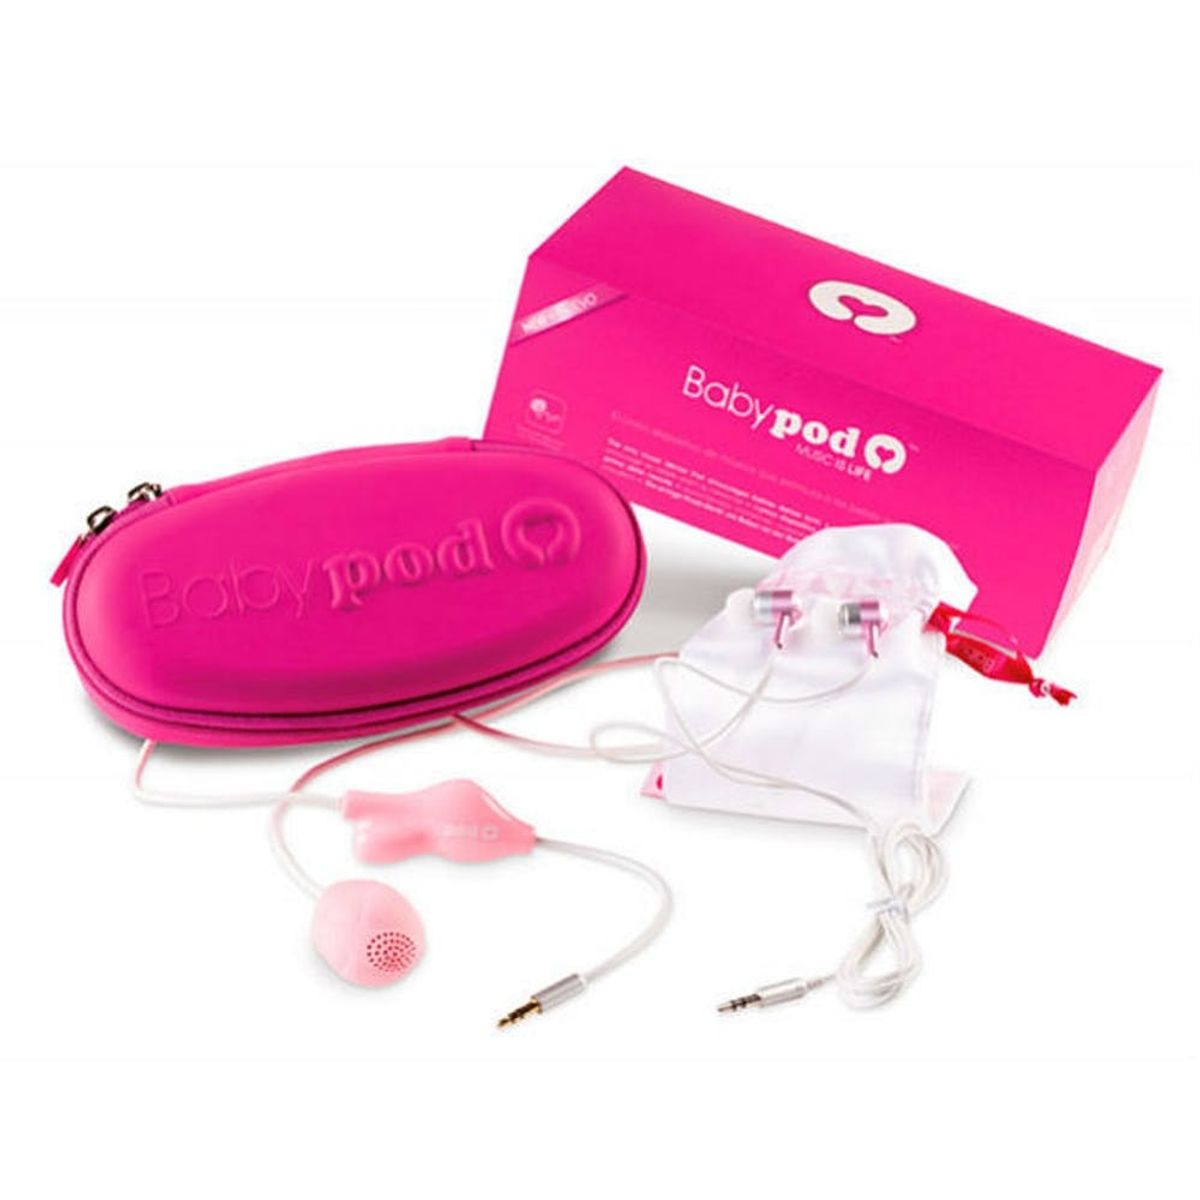 Babypod Is a Vaginal Speaker That Plays Music for Your Unborn Baby